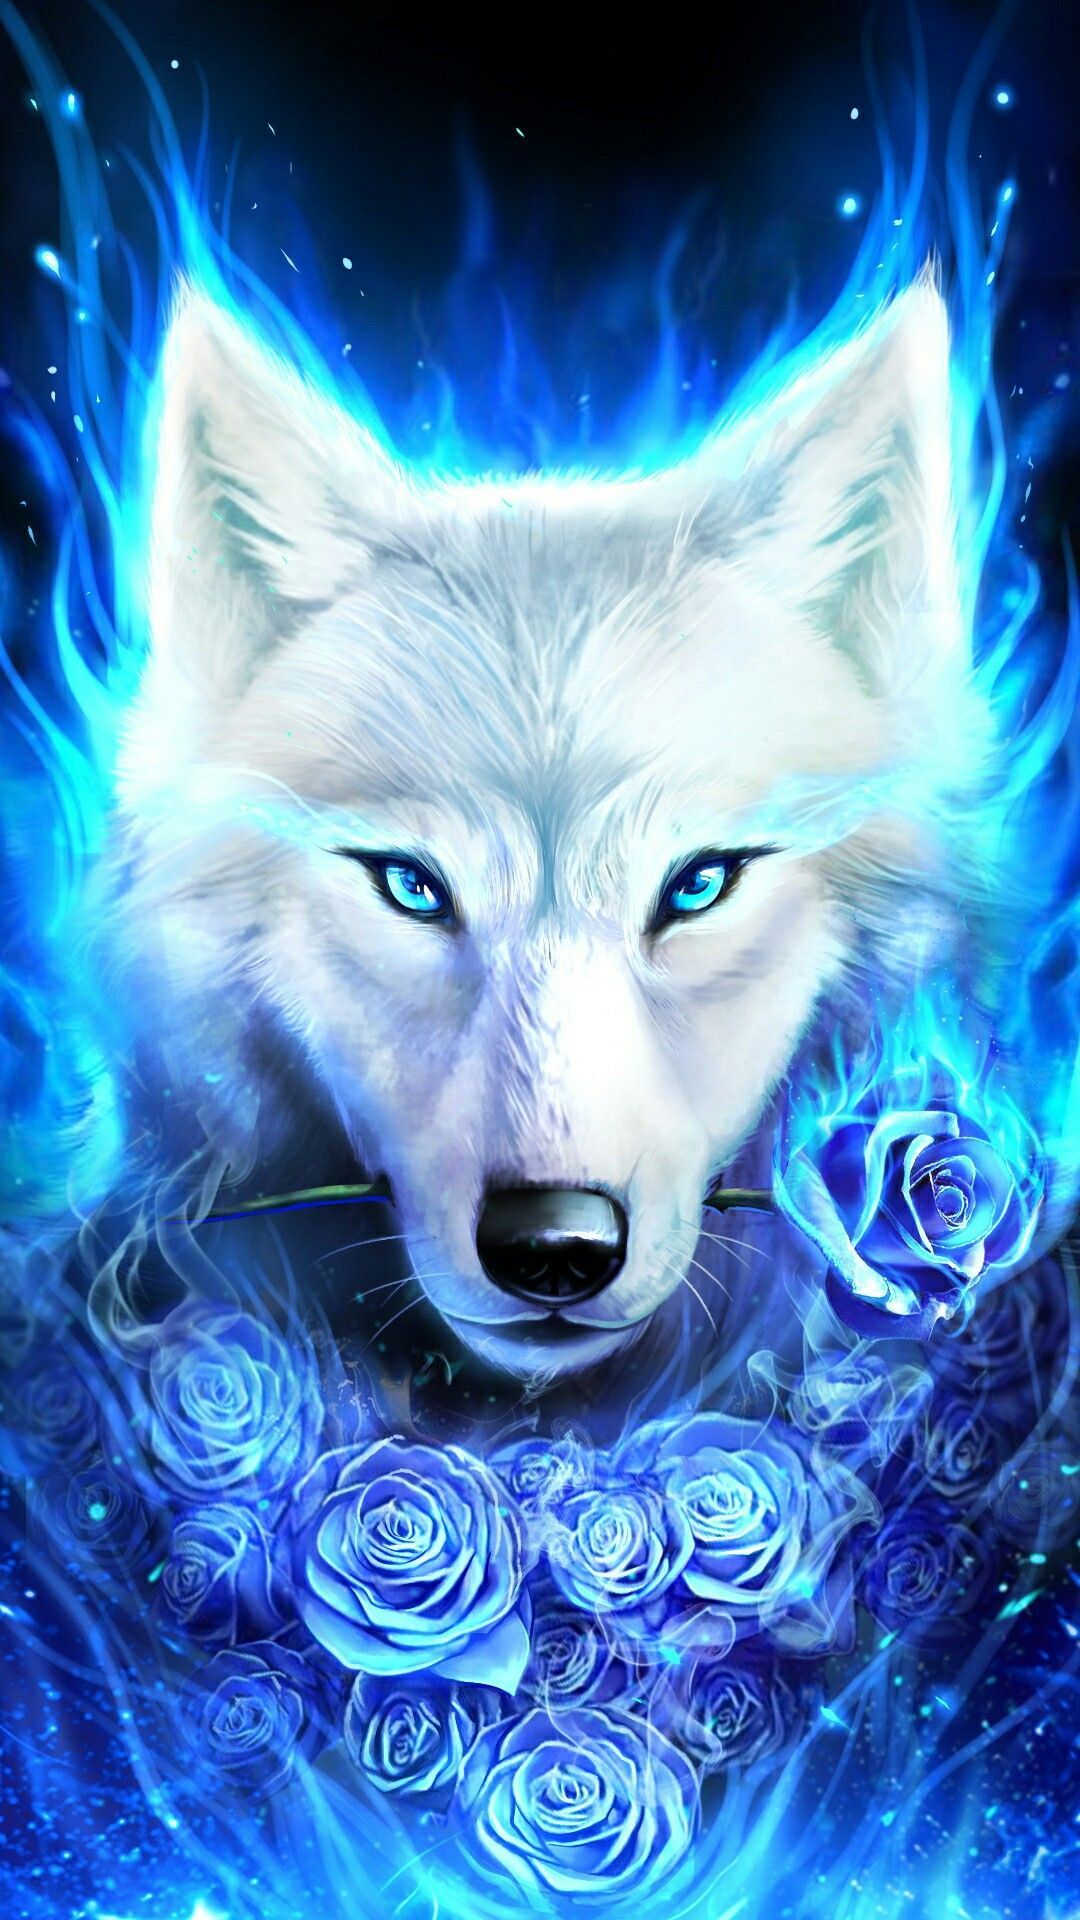 Flaming Blue Wolf wallpaper by RandomHooman  Download on ZEDGE  8bb0